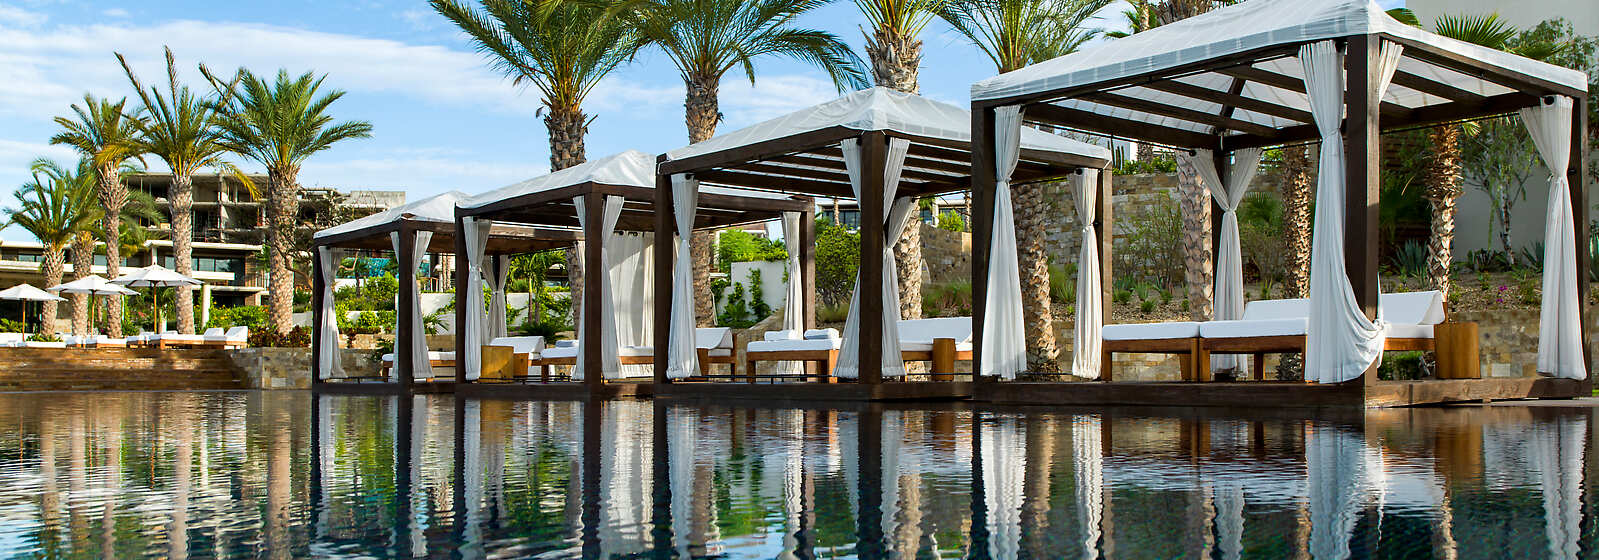 poolside cabanas and bungalows, perfect for all-day lounging